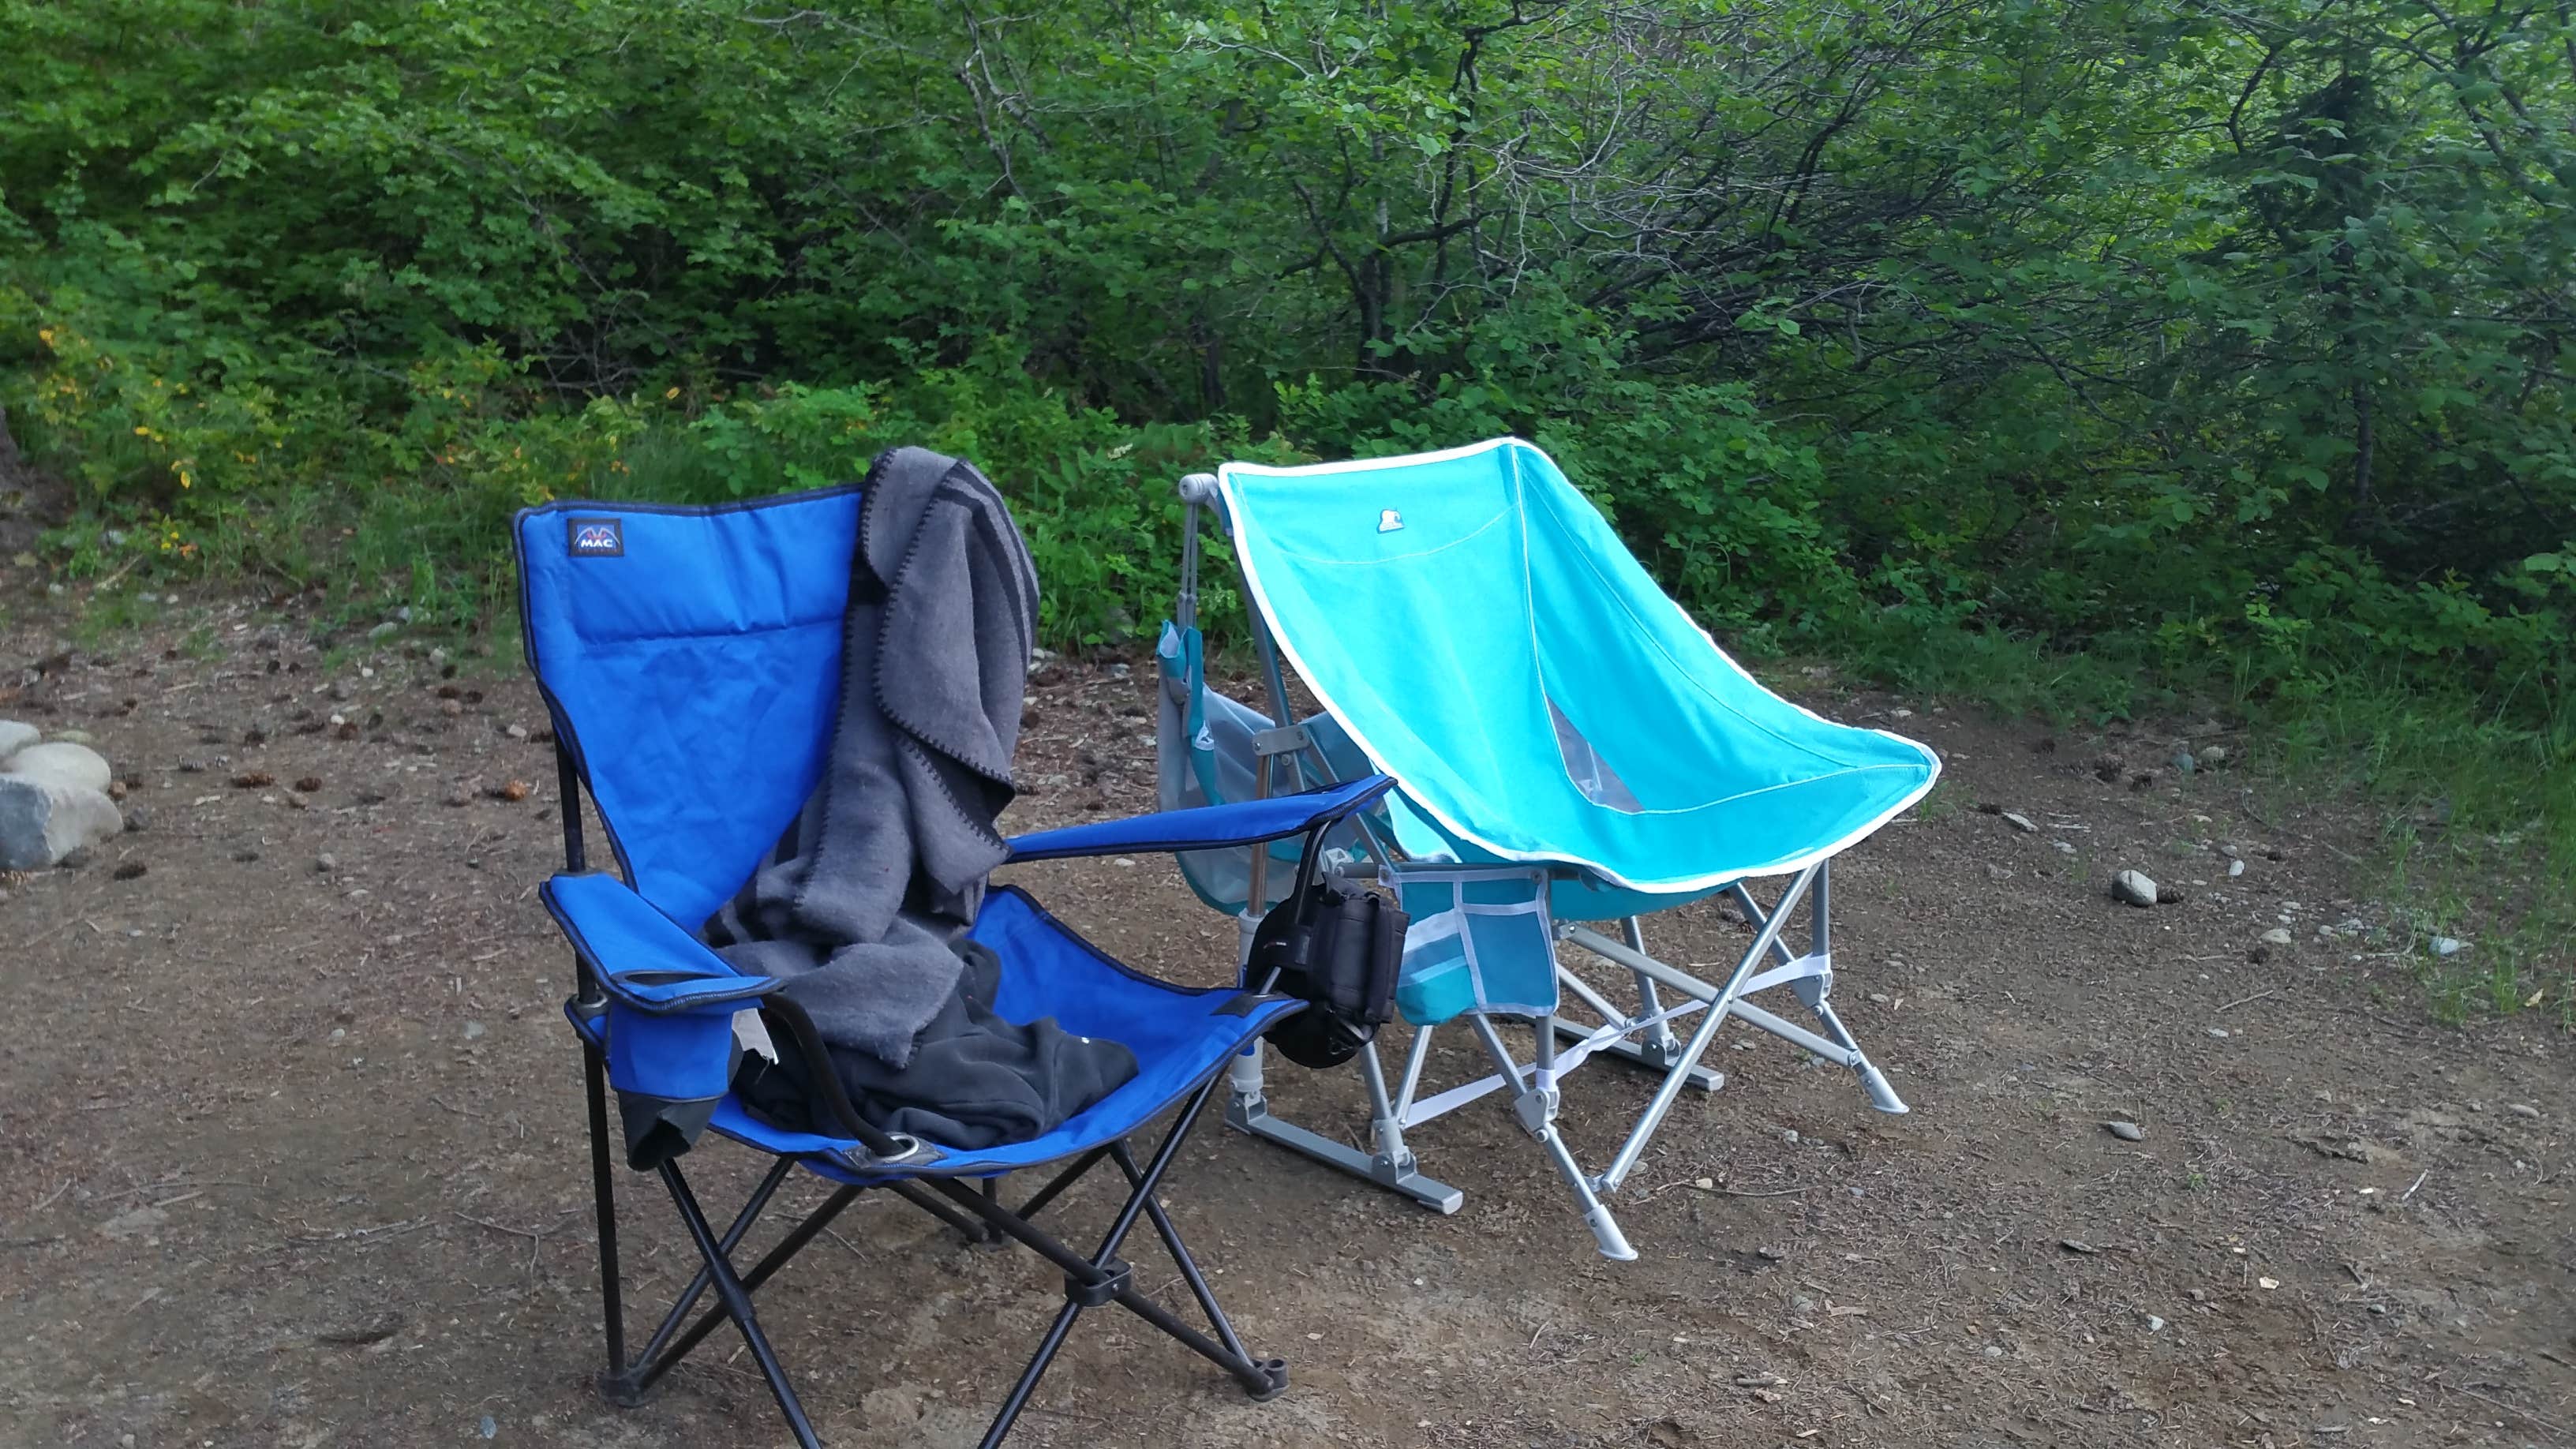 GCI Pod Rocker with Sunshade - compared to typical camp chair